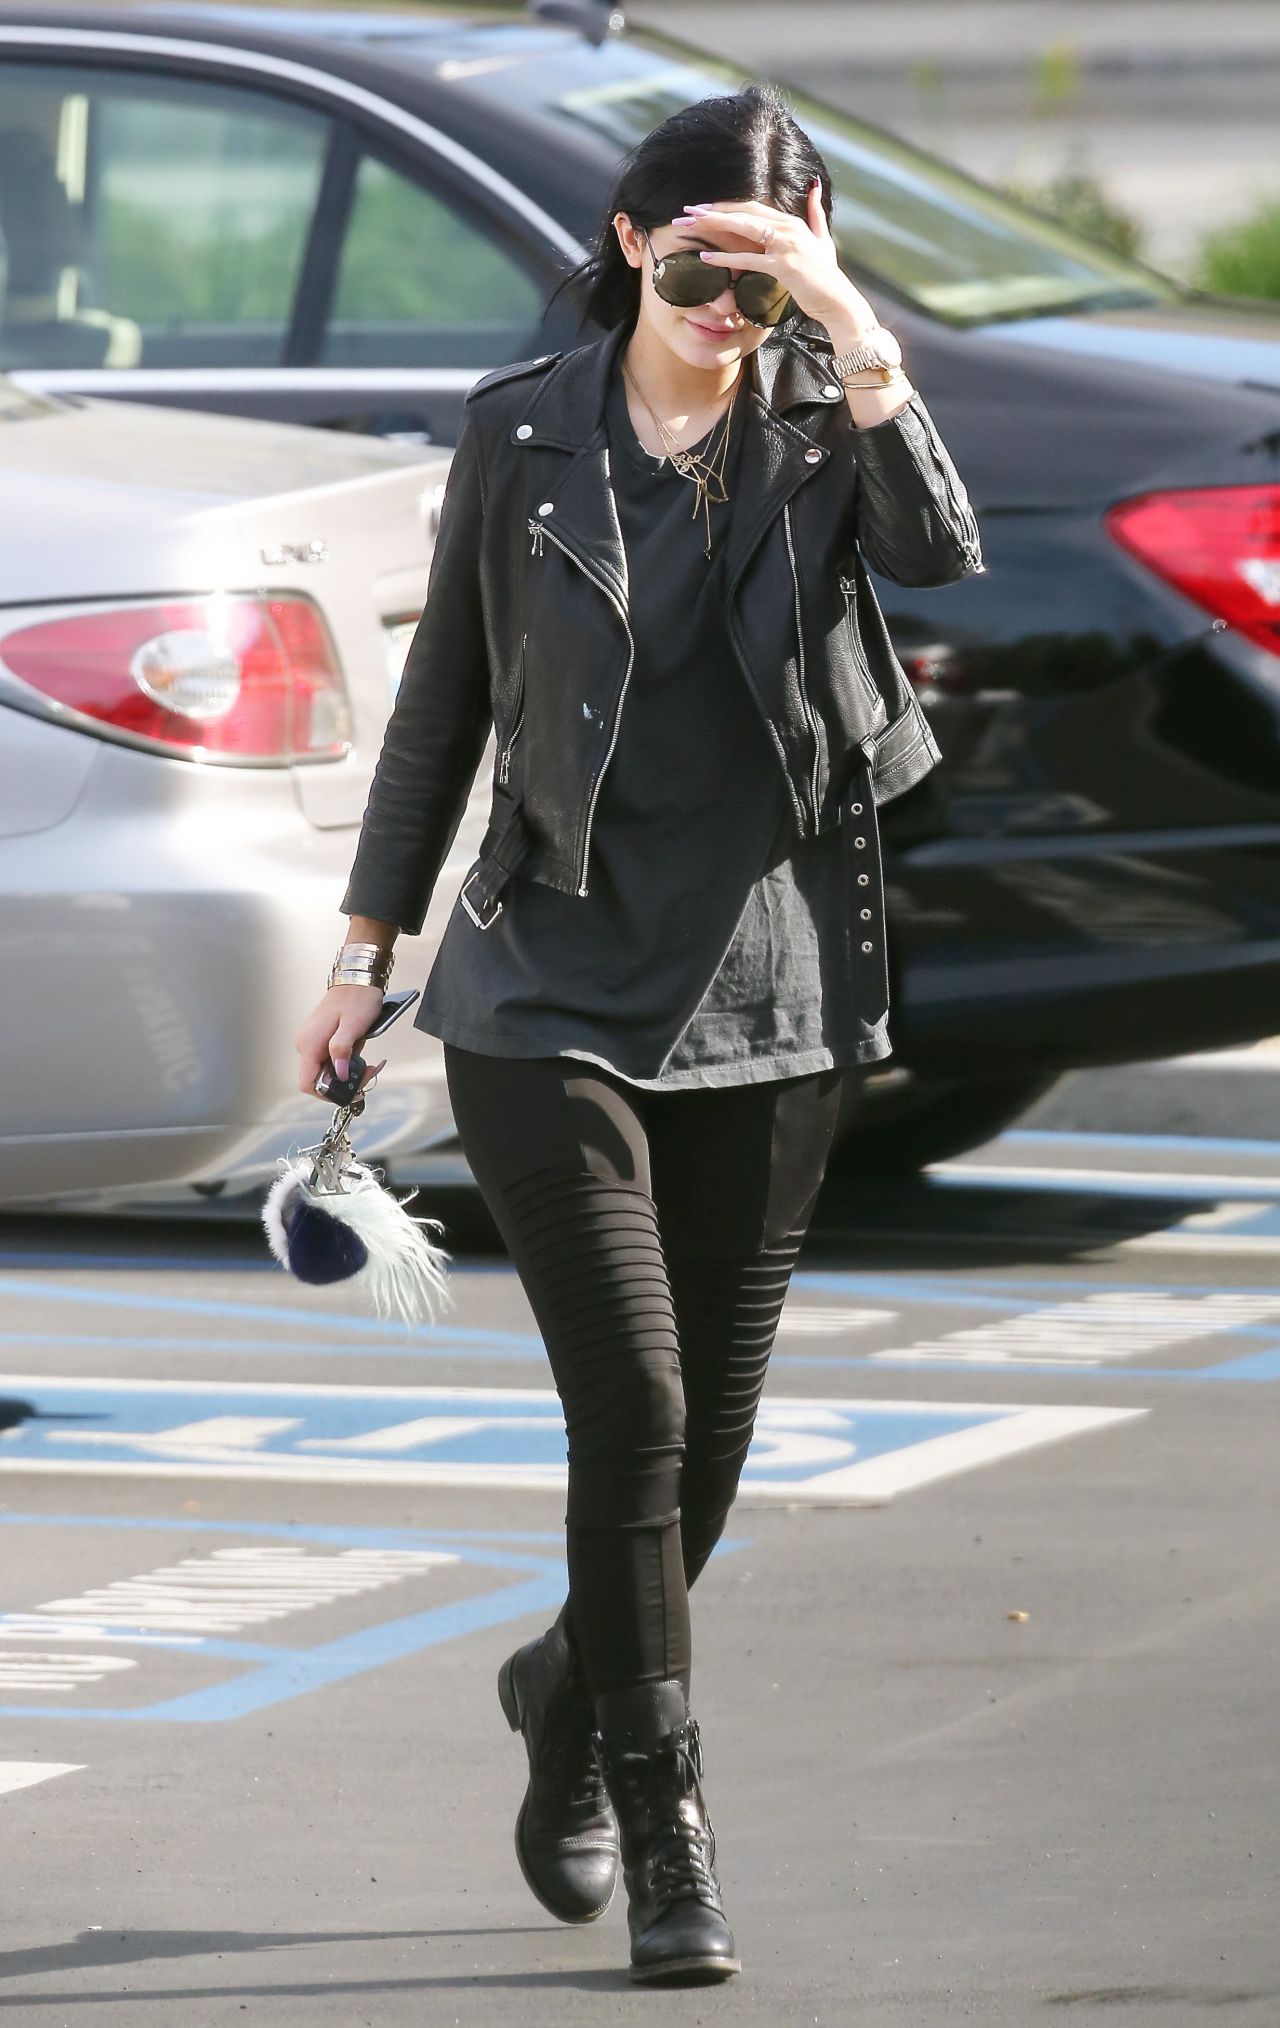 Kylie Jenner Lunch at Fred's January 5, 2016 – Star Style